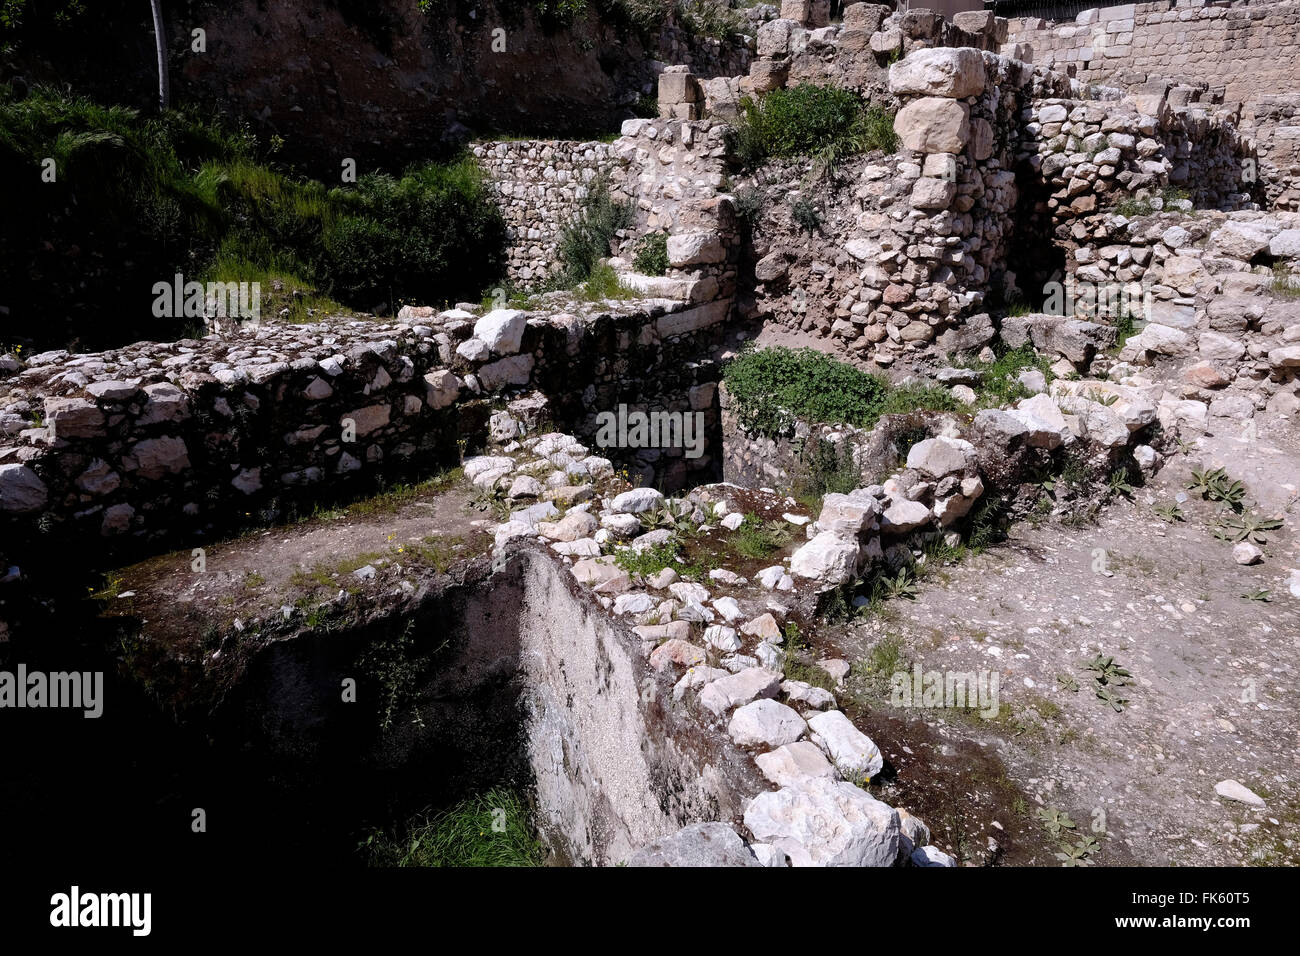 View of ruins of Ir David or City of David a major archaeological site near the Temple mount in East Jerusalem which is speculated to compose the original urban core of ancient Jerusalem. Israel on 07 March 2016 After nine years of excavating by the Israel Antiquities Authority, archaeologists at the City of David National Park succeeded in reaching the strata of ancient Jerusalem dating to the First Temple period. Stock Photo